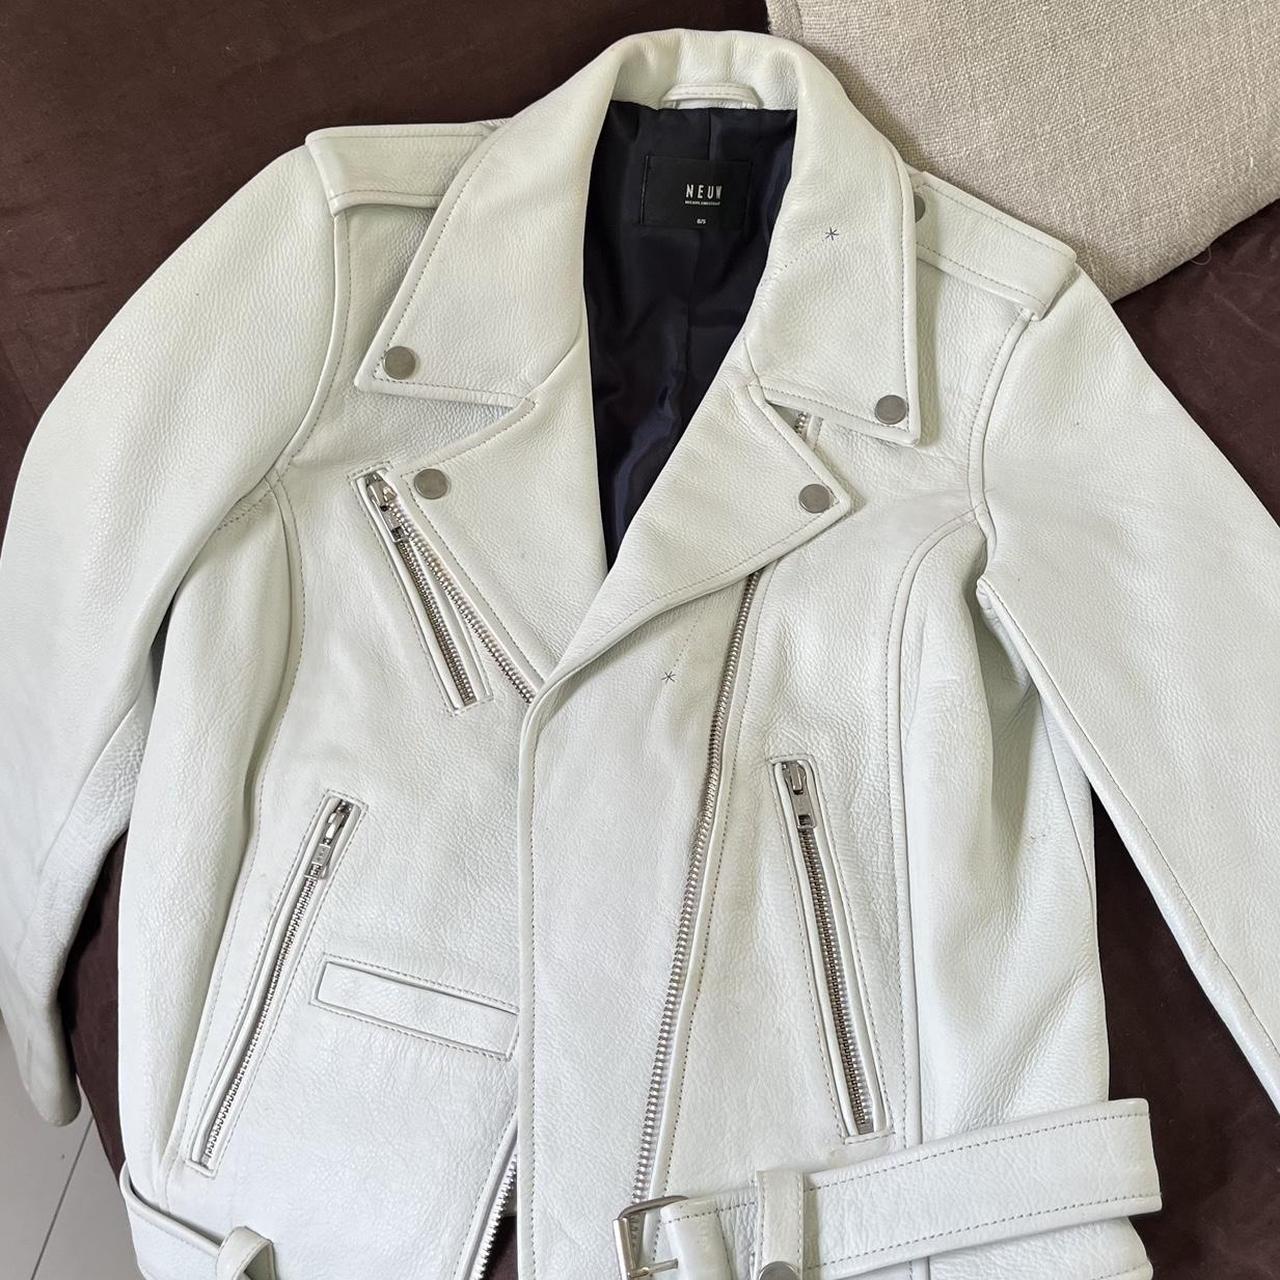 Neuw denim ivory leather jacket with embossing. Made... - Depop